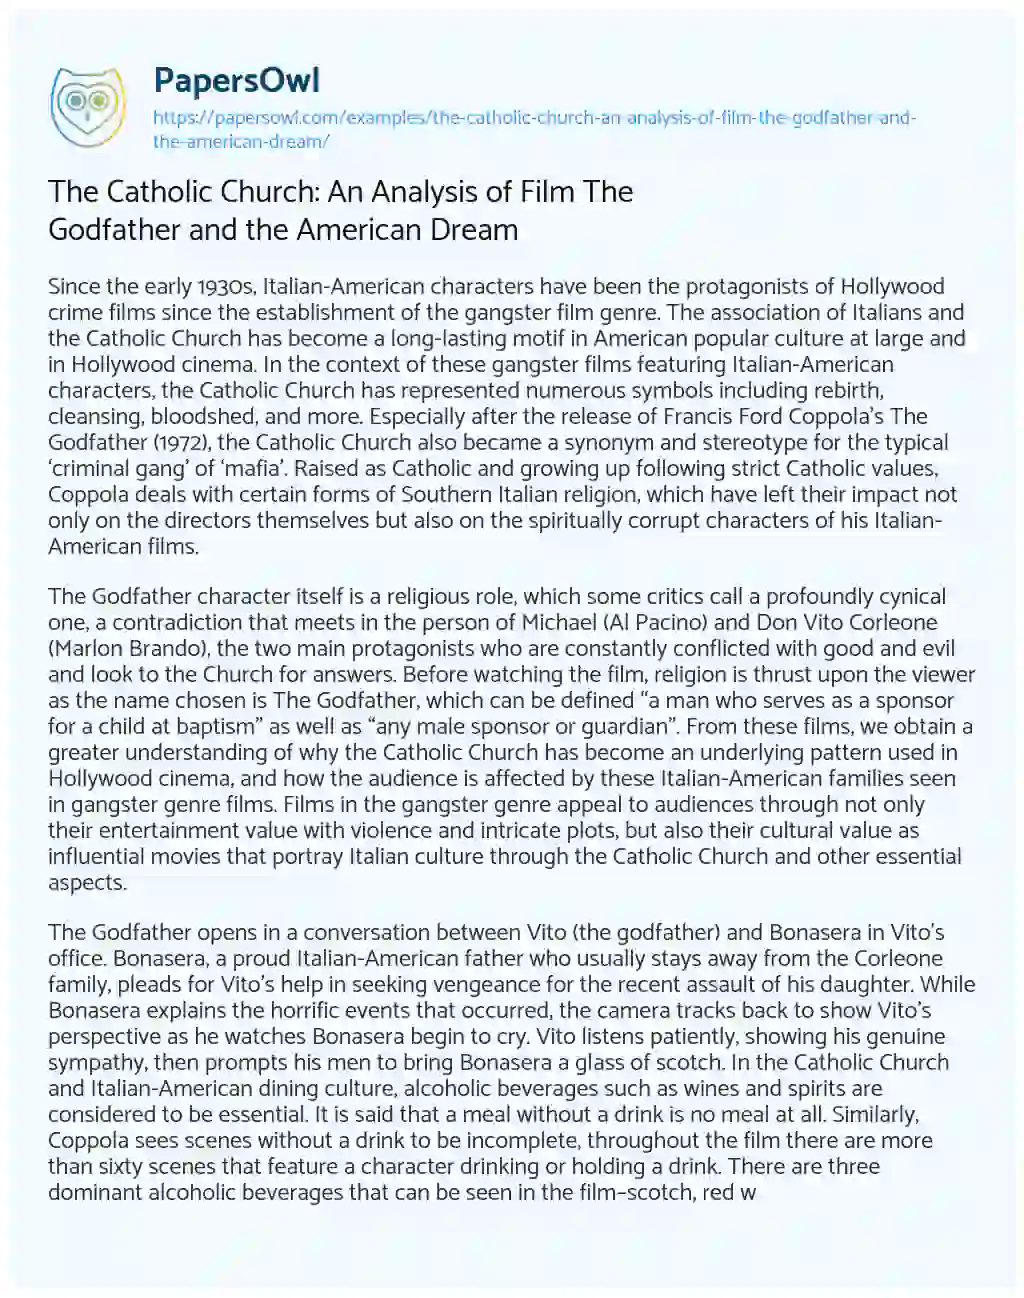 Essay on The Catholic Church: an Analysis of Film the Godfather and the American Dream